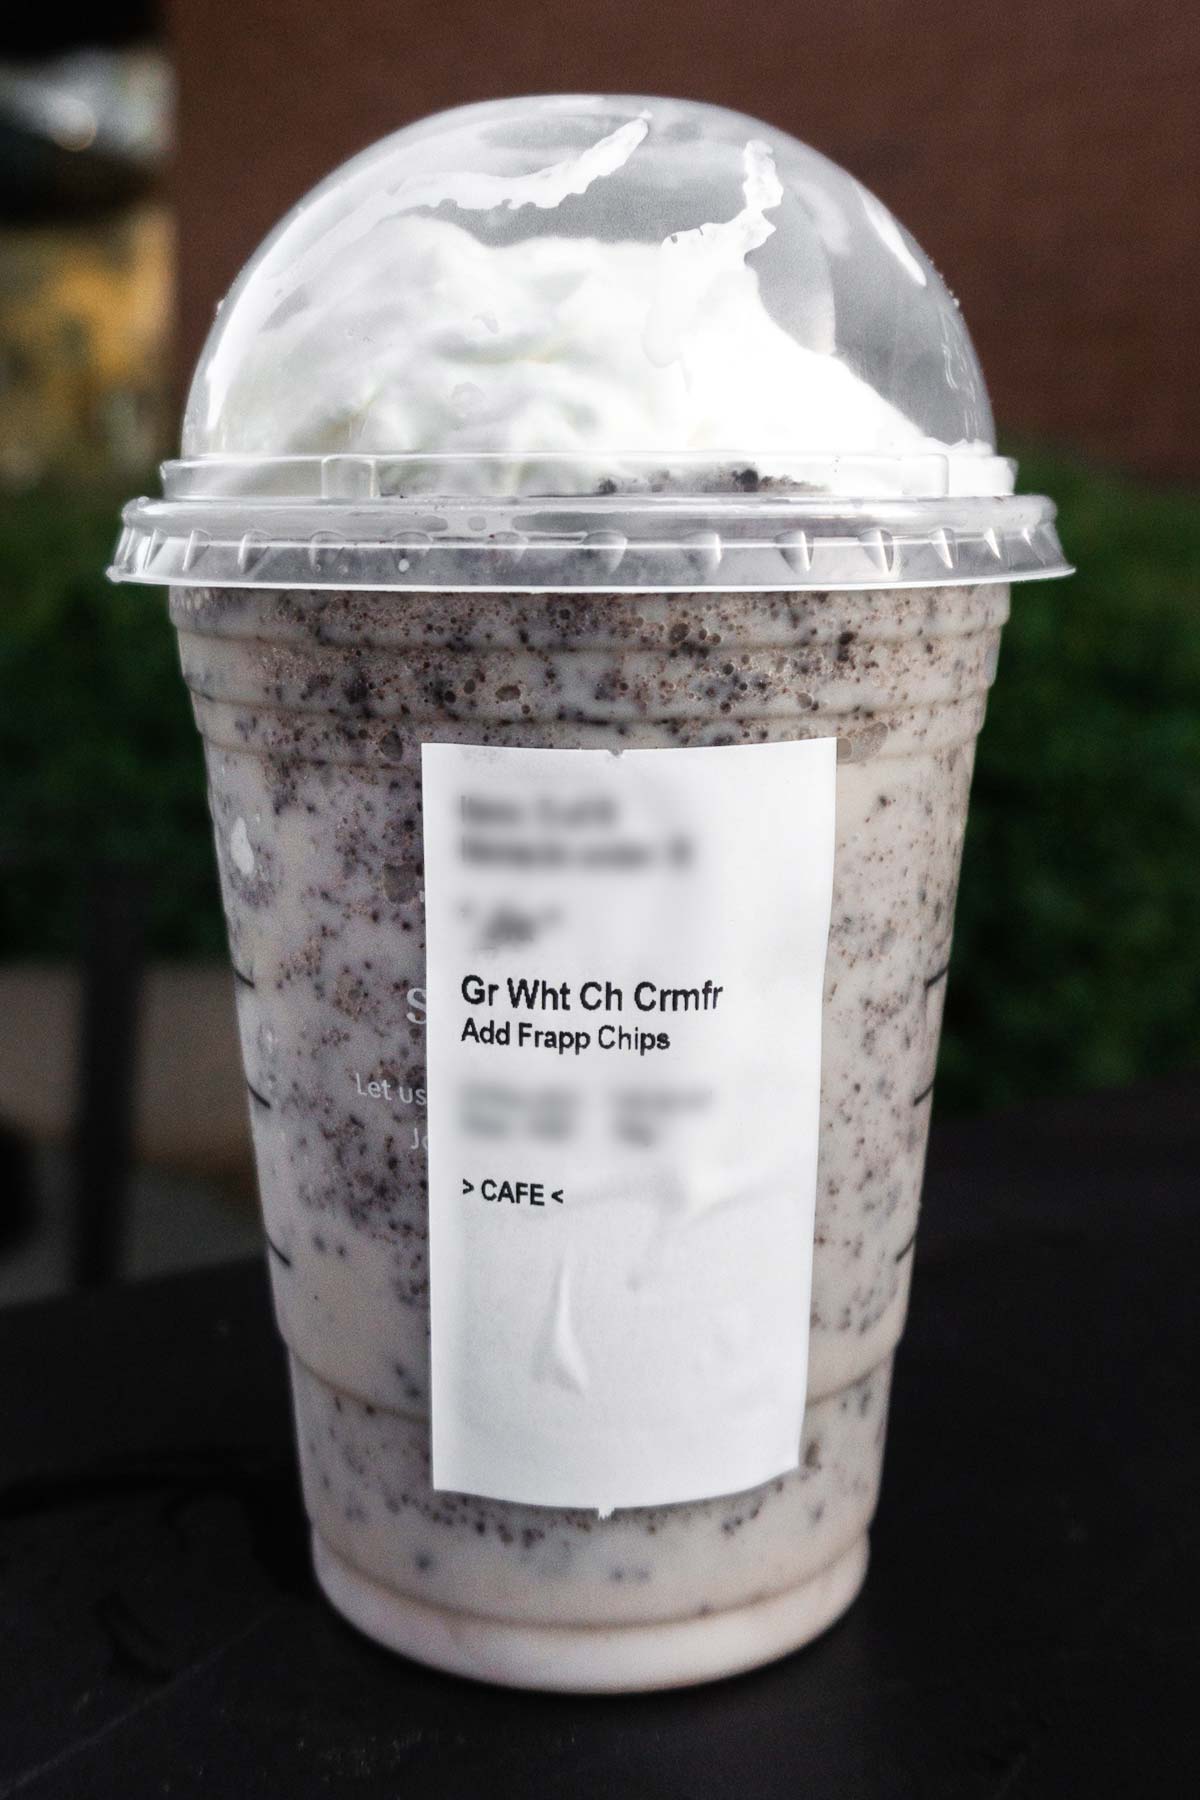 Cookies and Cream Frappuccino in a Starbucks cup, side view with the order label.